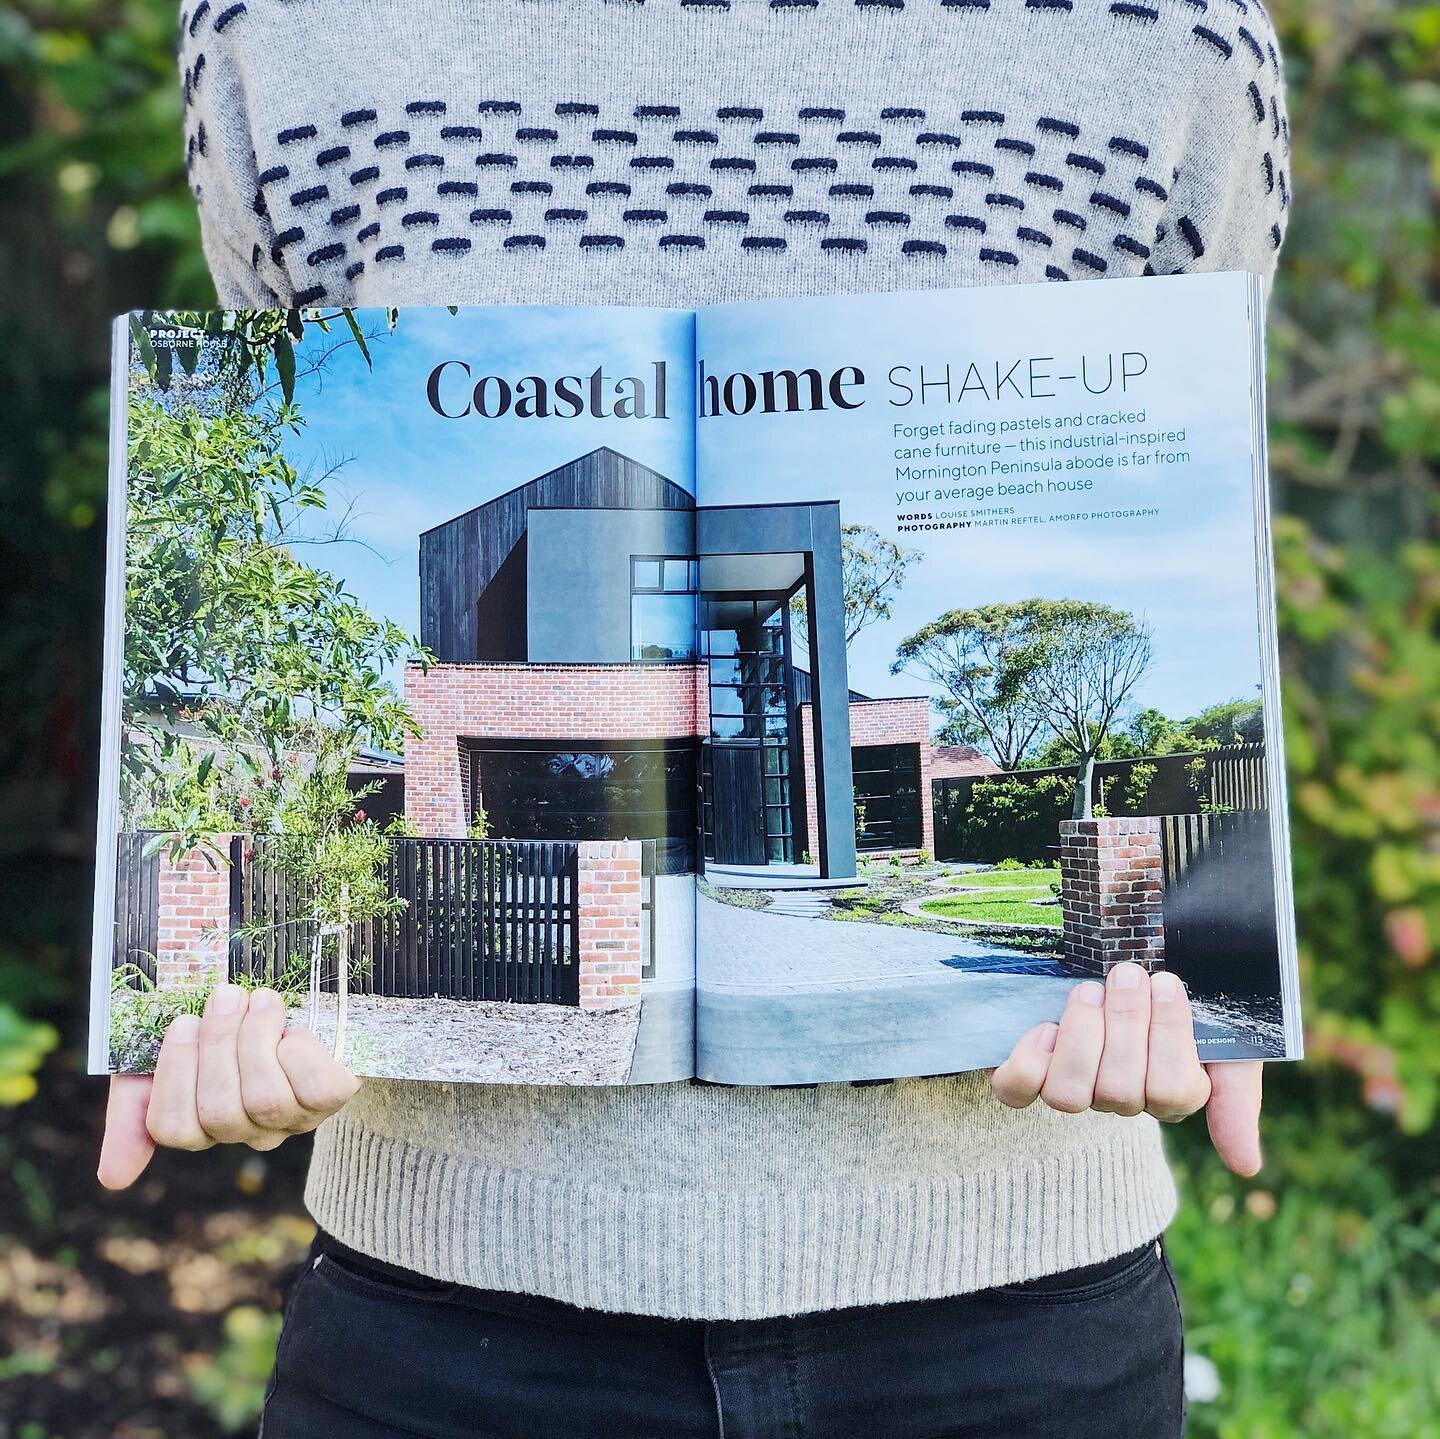 Alwasys fun seeing our images in print. Check out @littlebrickstudio brilliant design, styling by @thecullininteriors and build by @swellbuildinggroup in this months  @granddesignsau

#buildingdesign #architecture #architecturelovers #dreamhome #inte